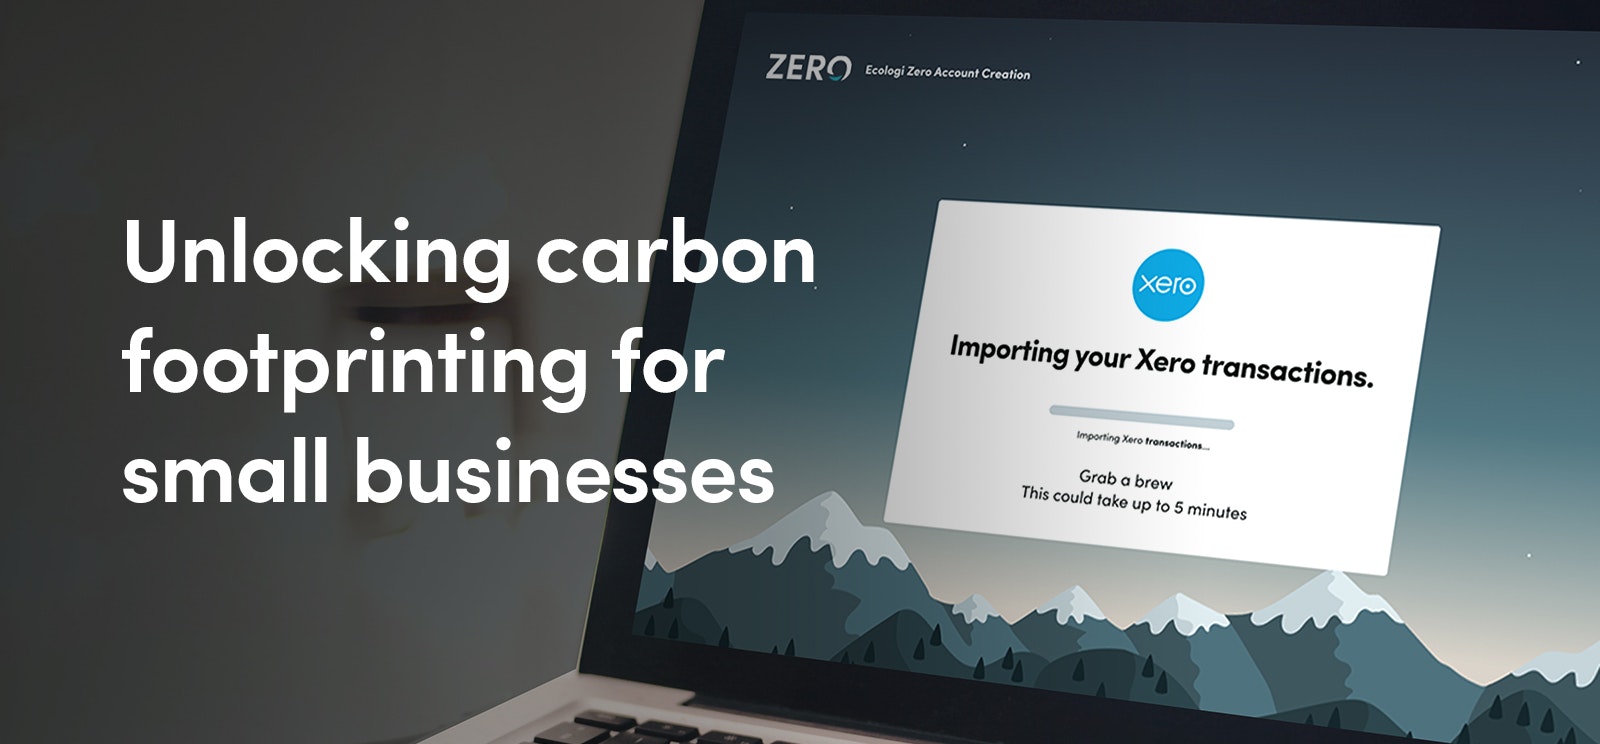 Unlocking carbon footprinting for businesses